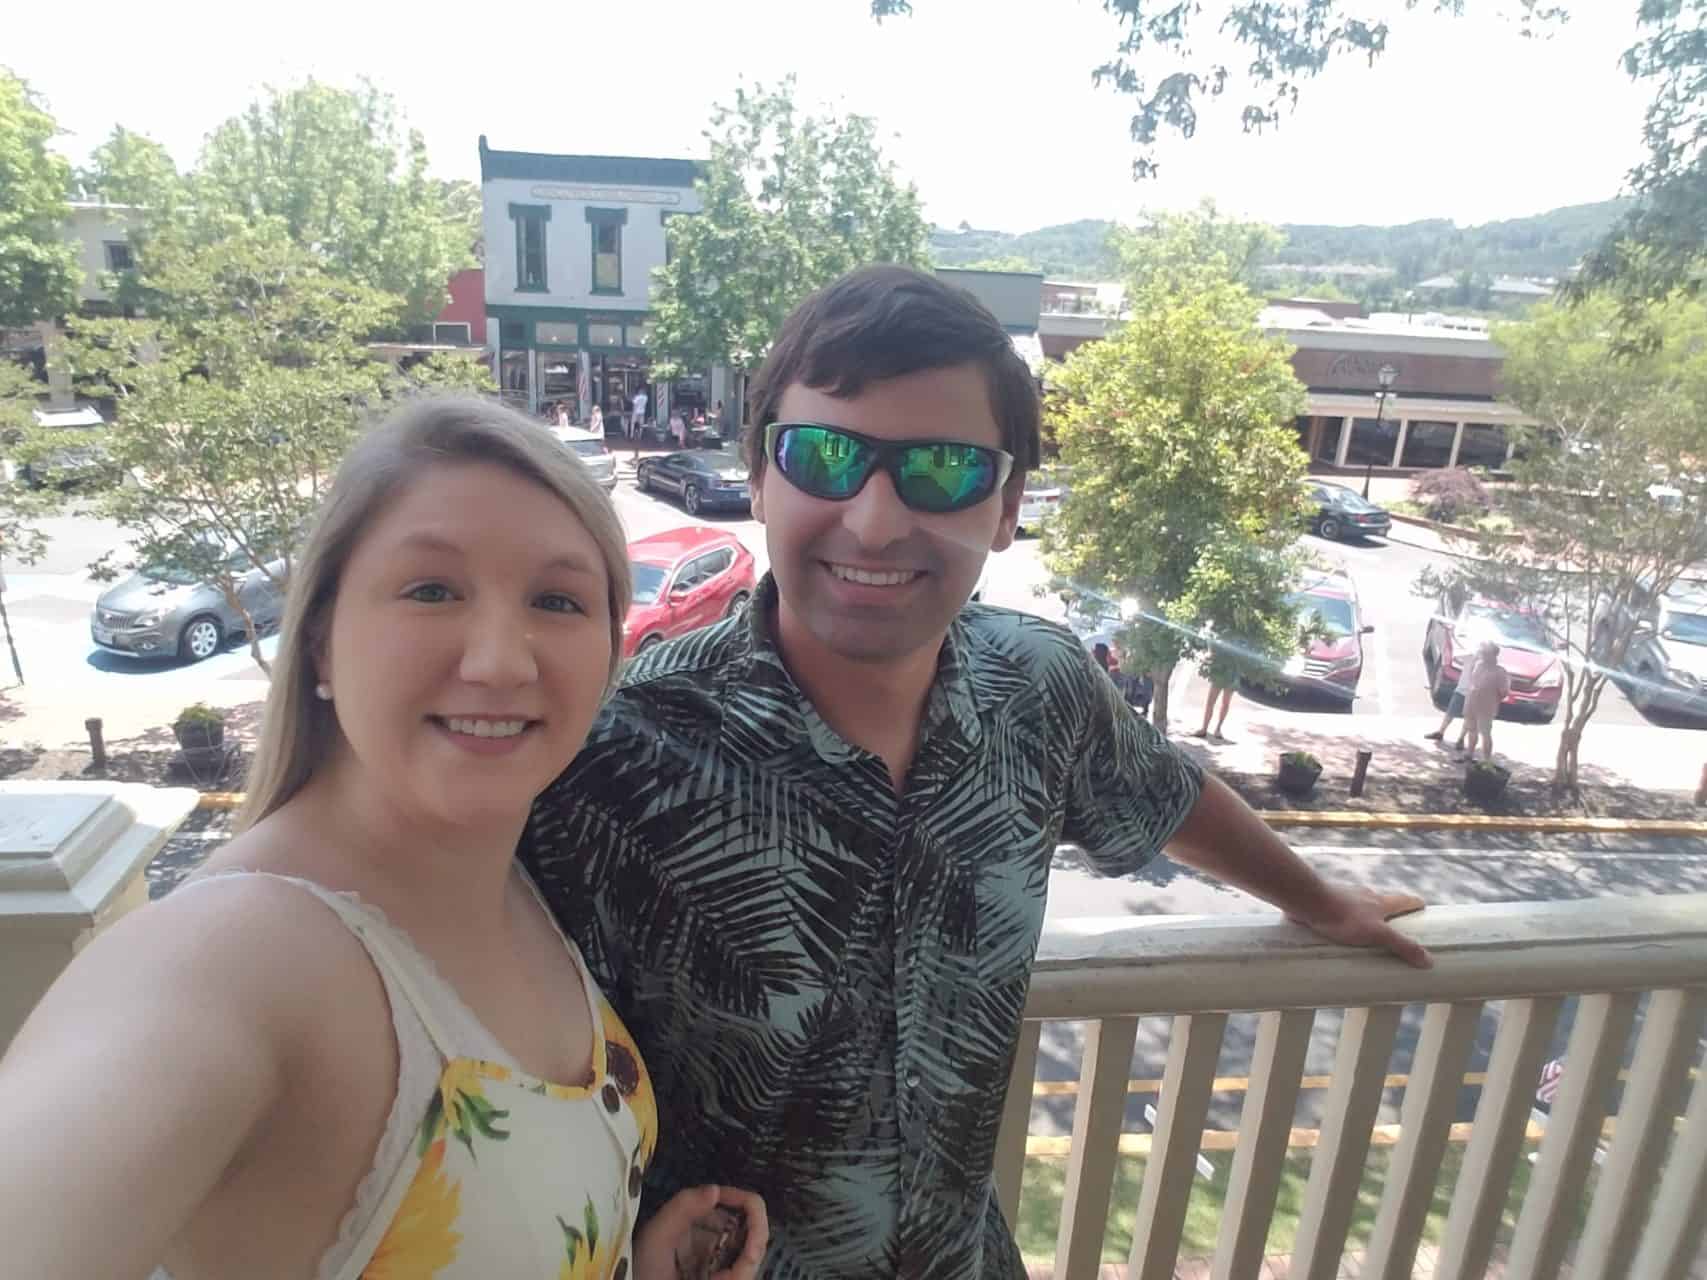 A fun day in Dahlonega, Georgia. A piture of me and my husband taking in the beautiful city.